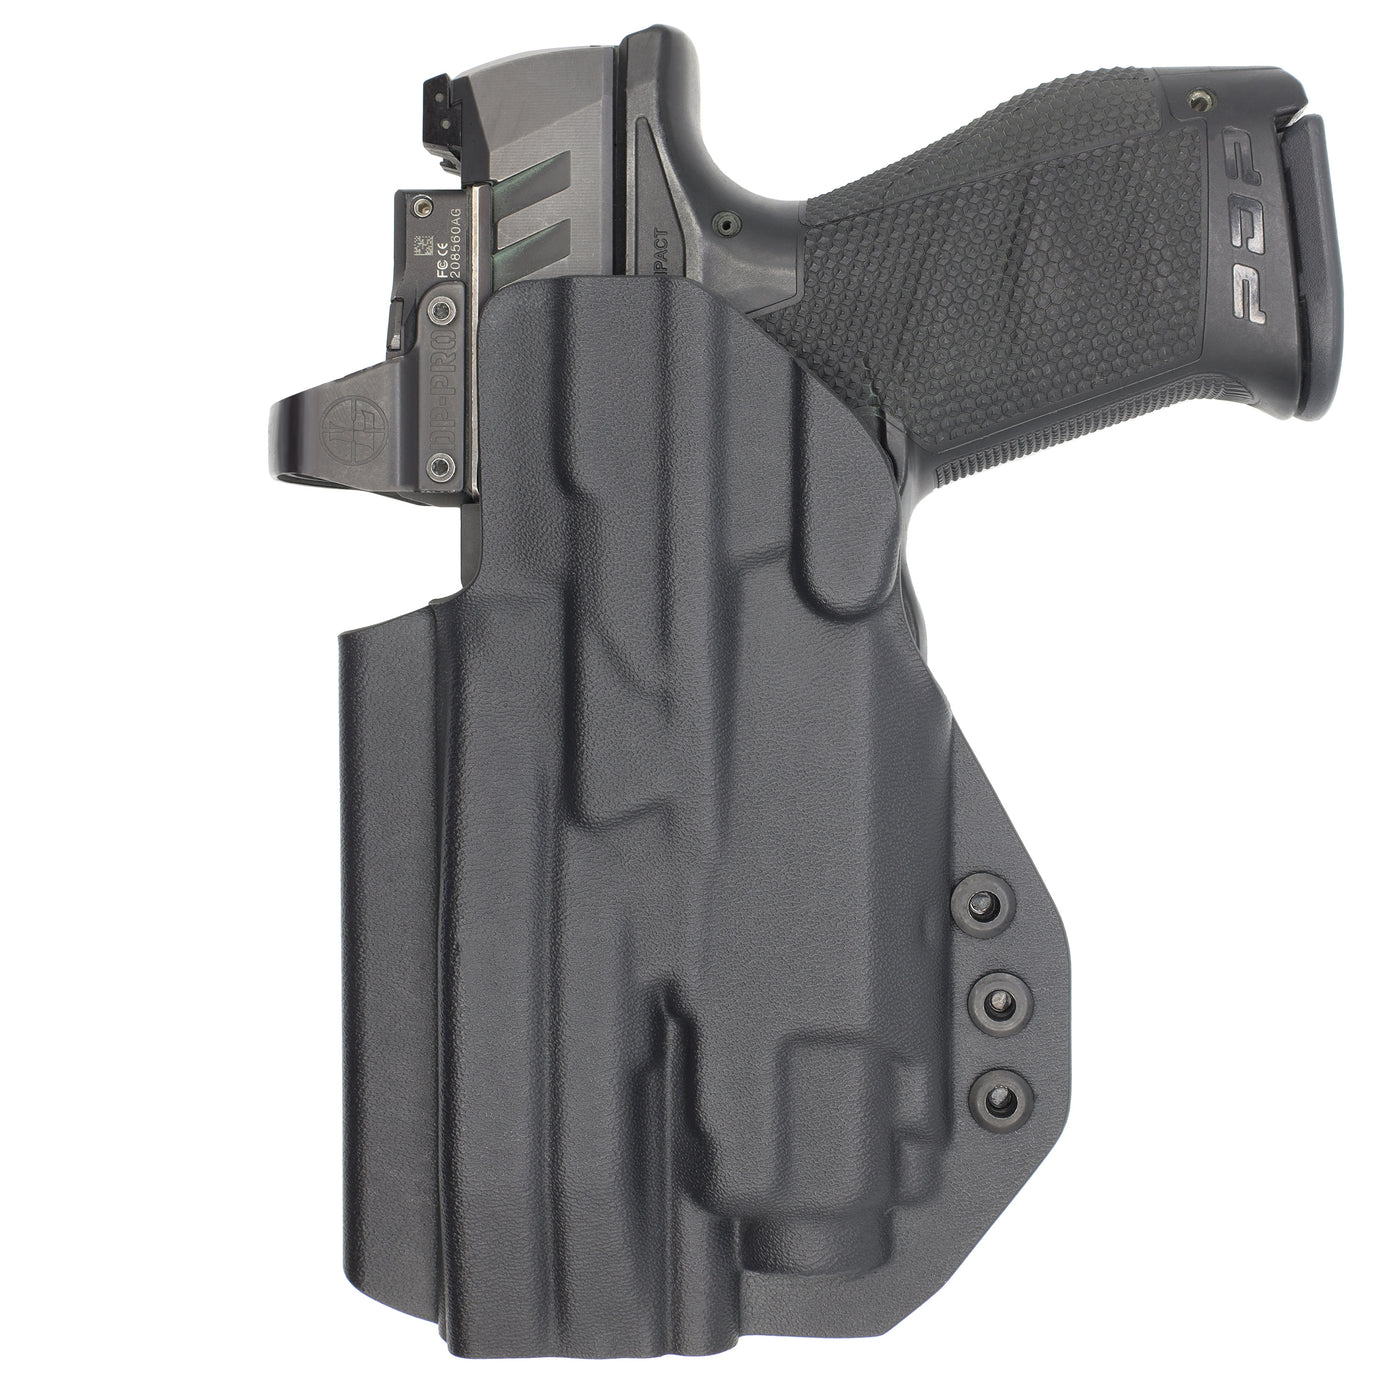 C&G Holsters quickship IWB Tactical M&P 9/40 streamlight TLR8 holstered back view